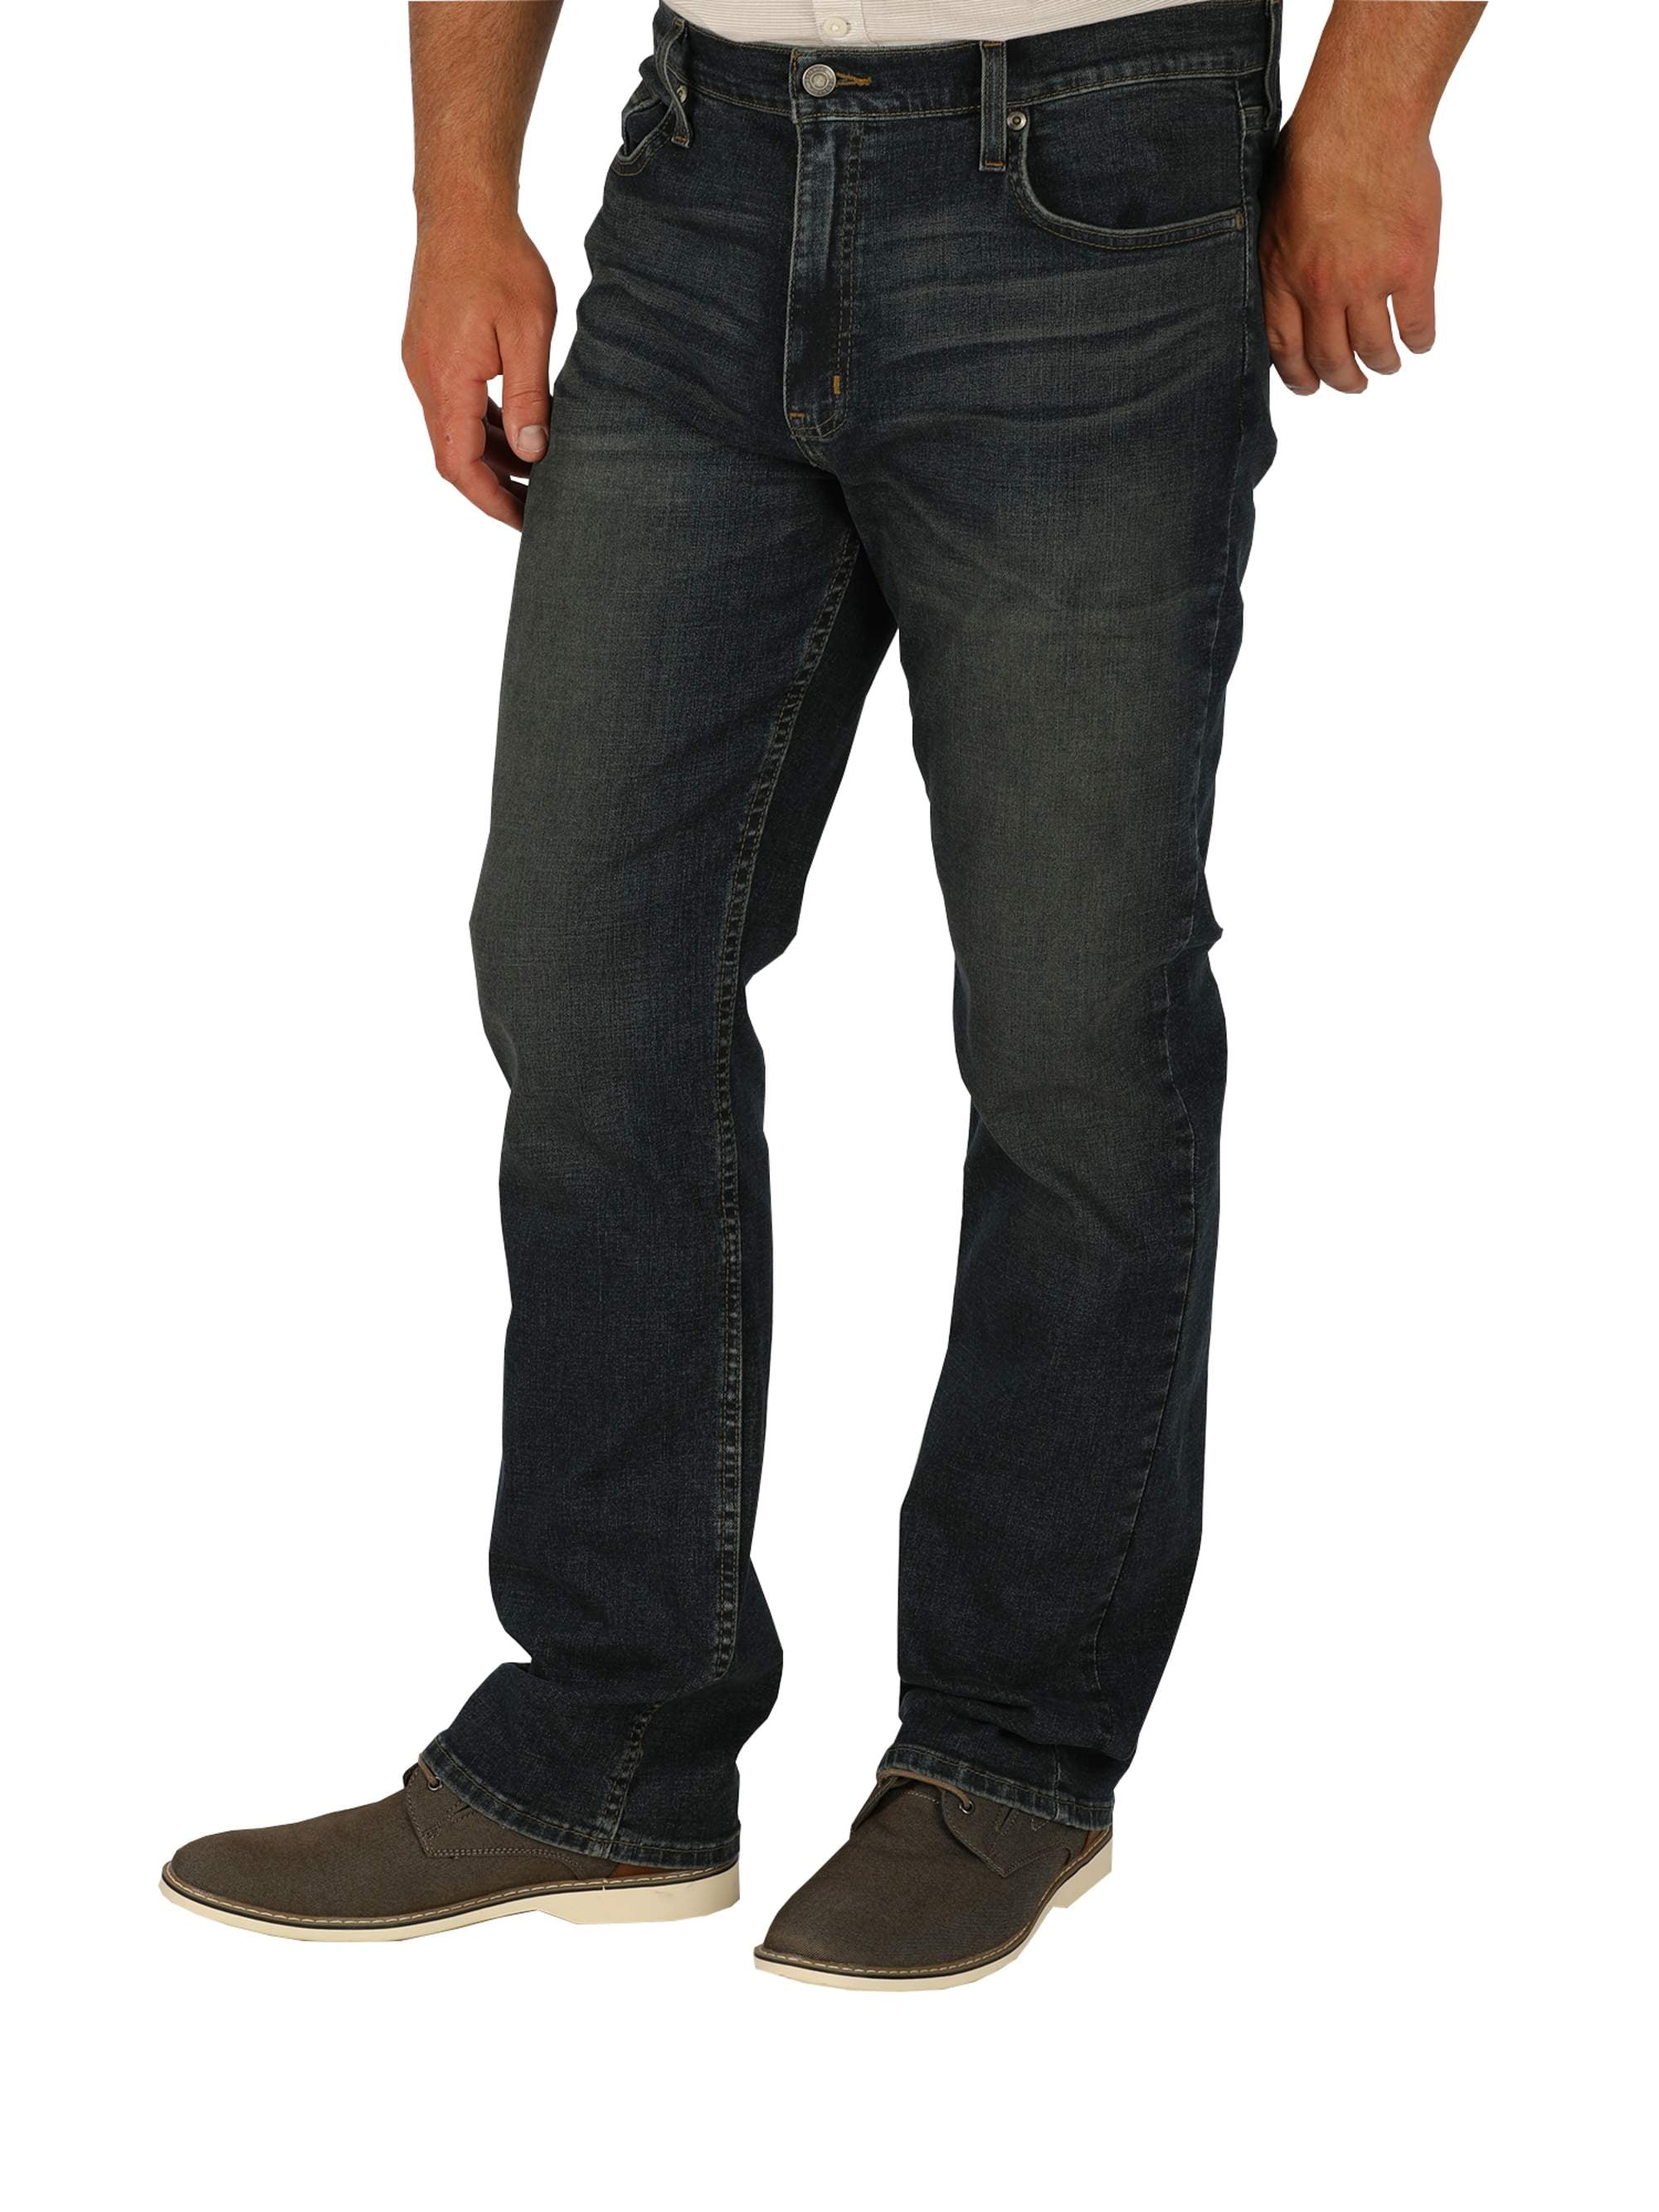 The Main Types of Jeans For Men | Cool Material